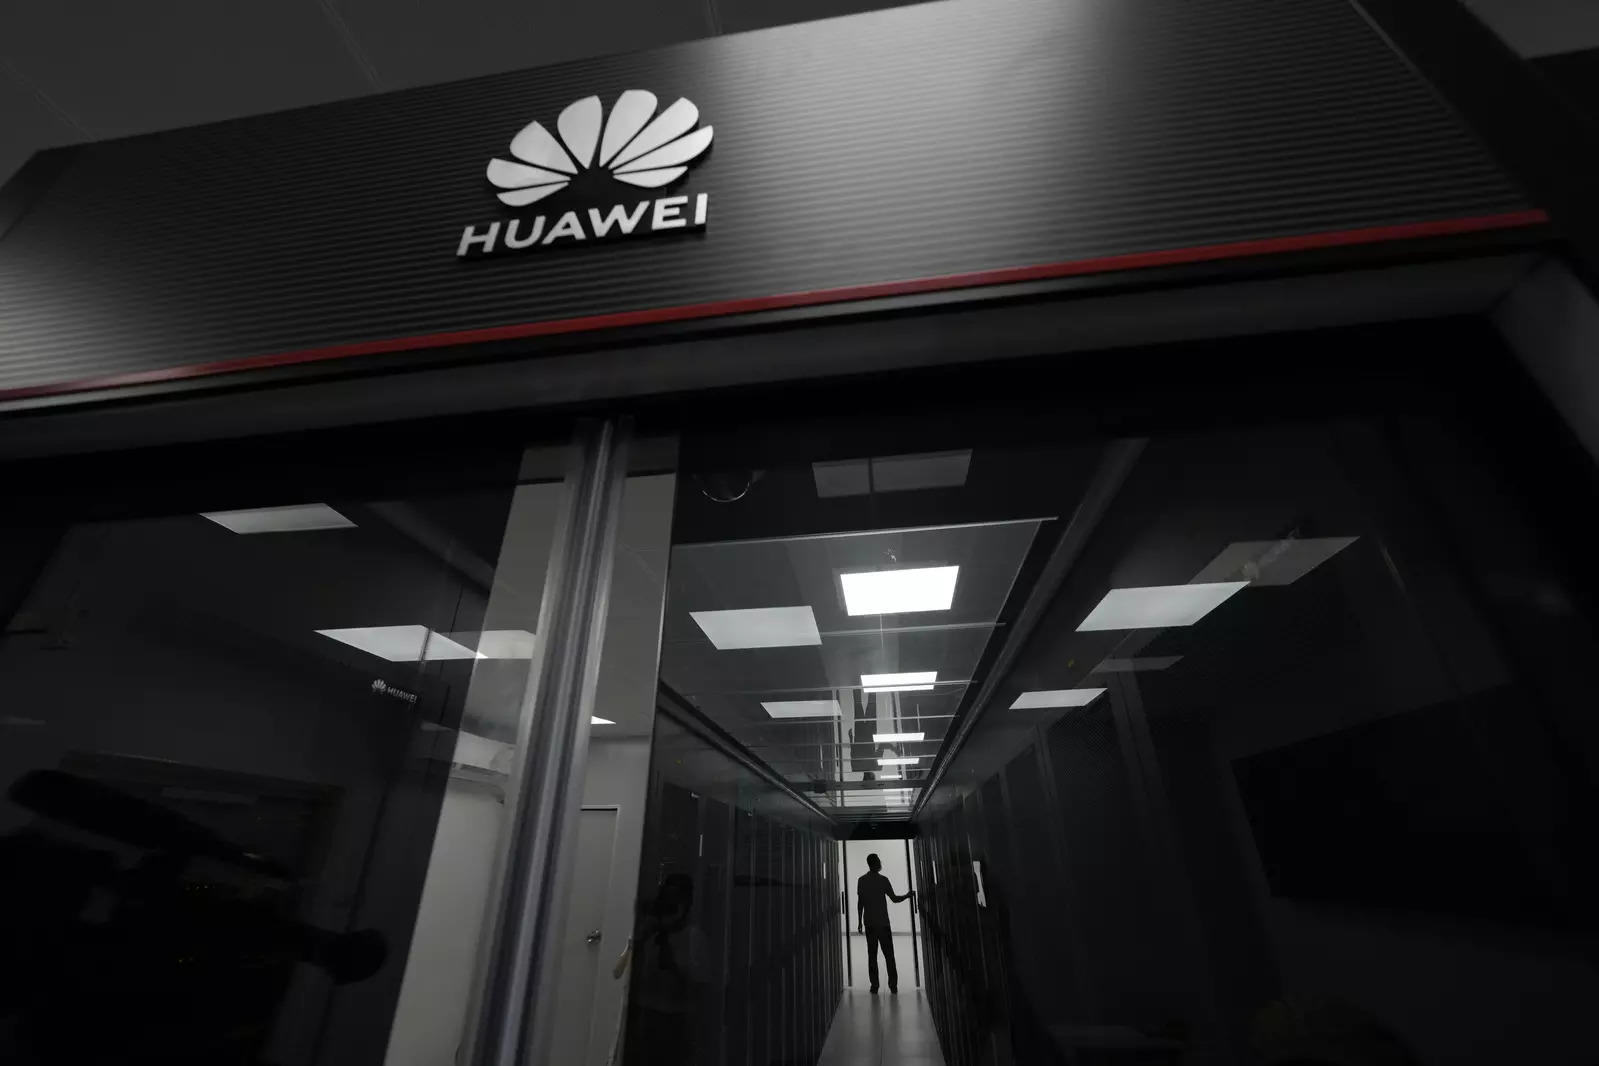 Huawei continues to dominate global telecom equipment market in 2021: Report